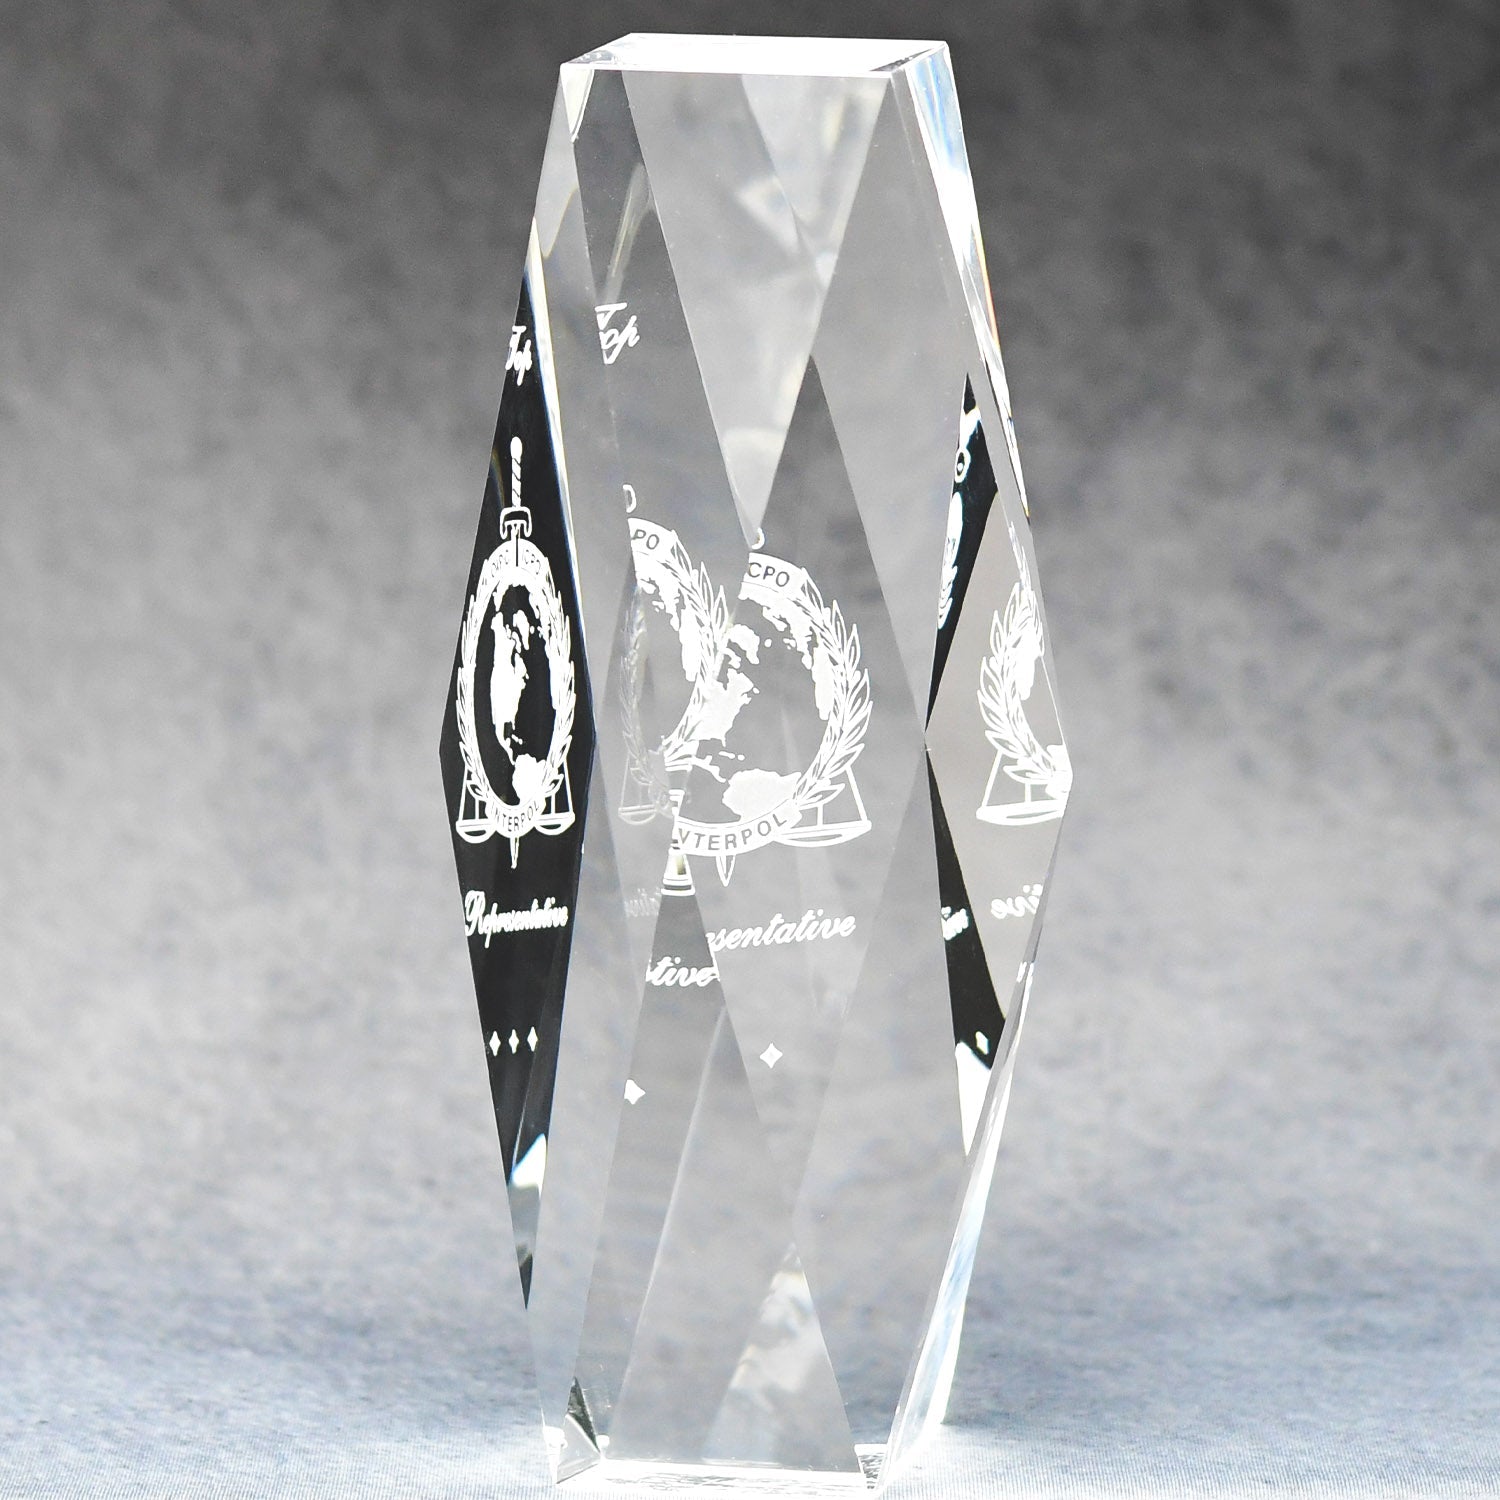 Multi-Faceted Optic Crystal Tower | Alliance Awards LLC.